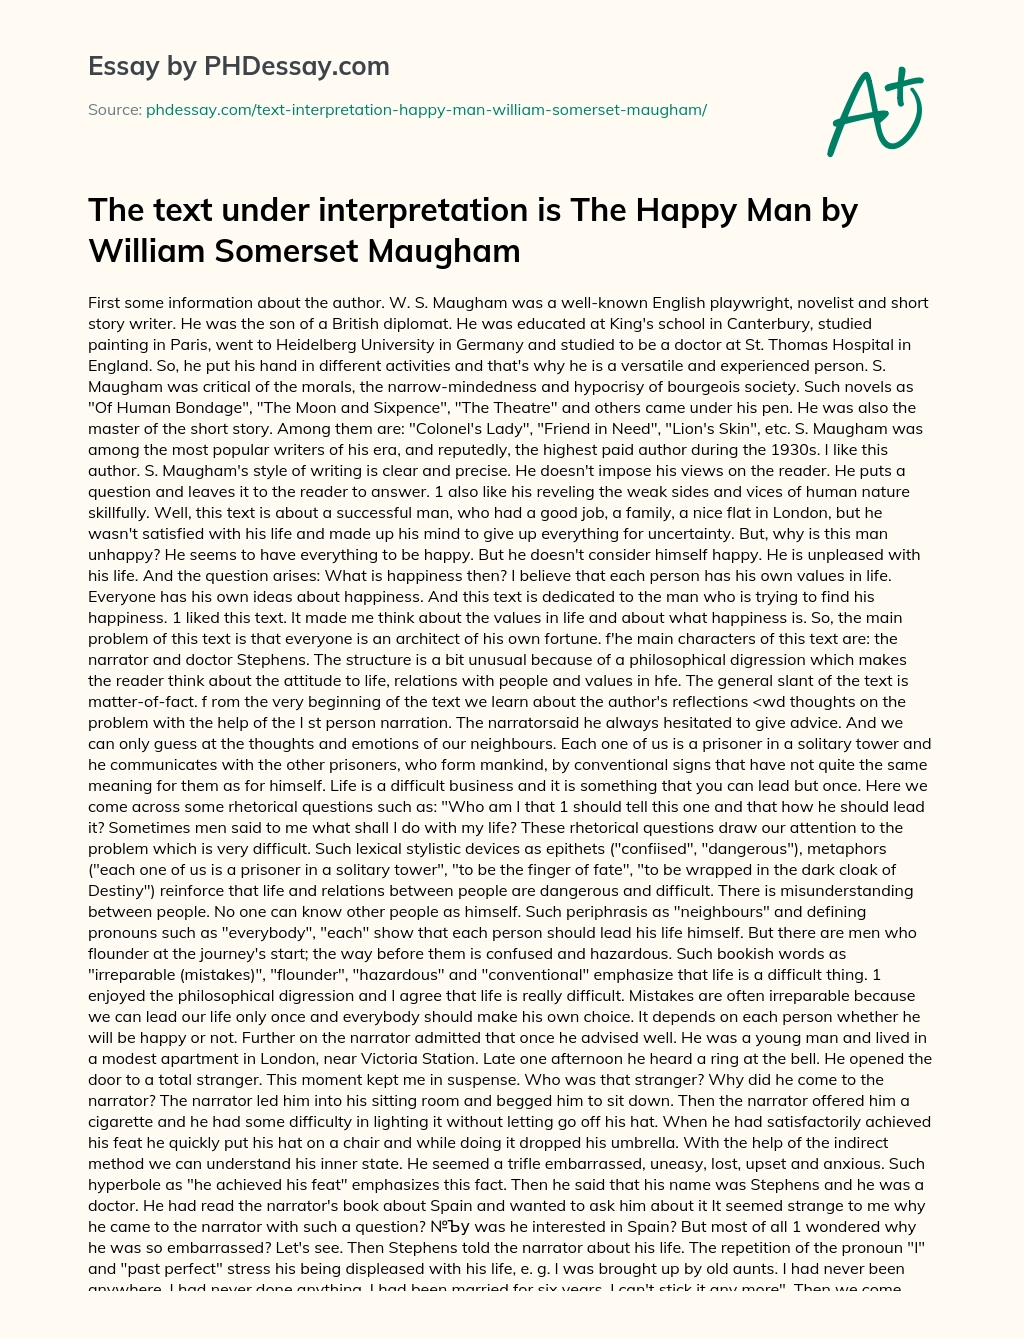 The text under interpretation is The Happy Man by William Somerset Maugham essay